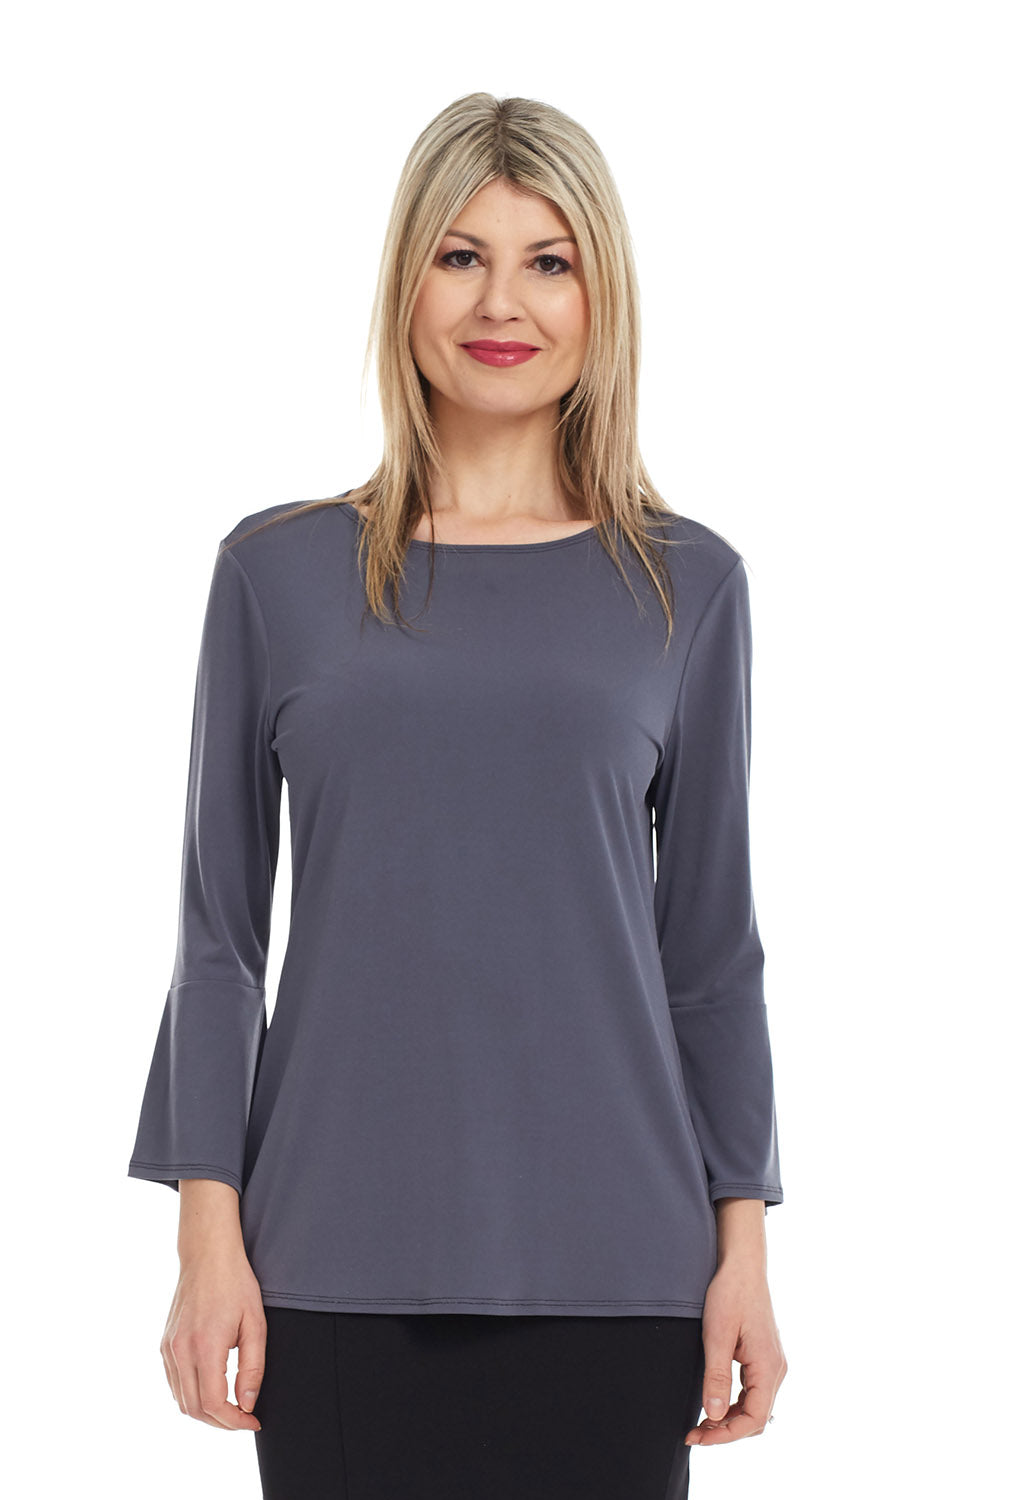 Esteez BLOSSOM Top - 3/4 Trumpet Bell Sleeve for Women - CHARCOAL